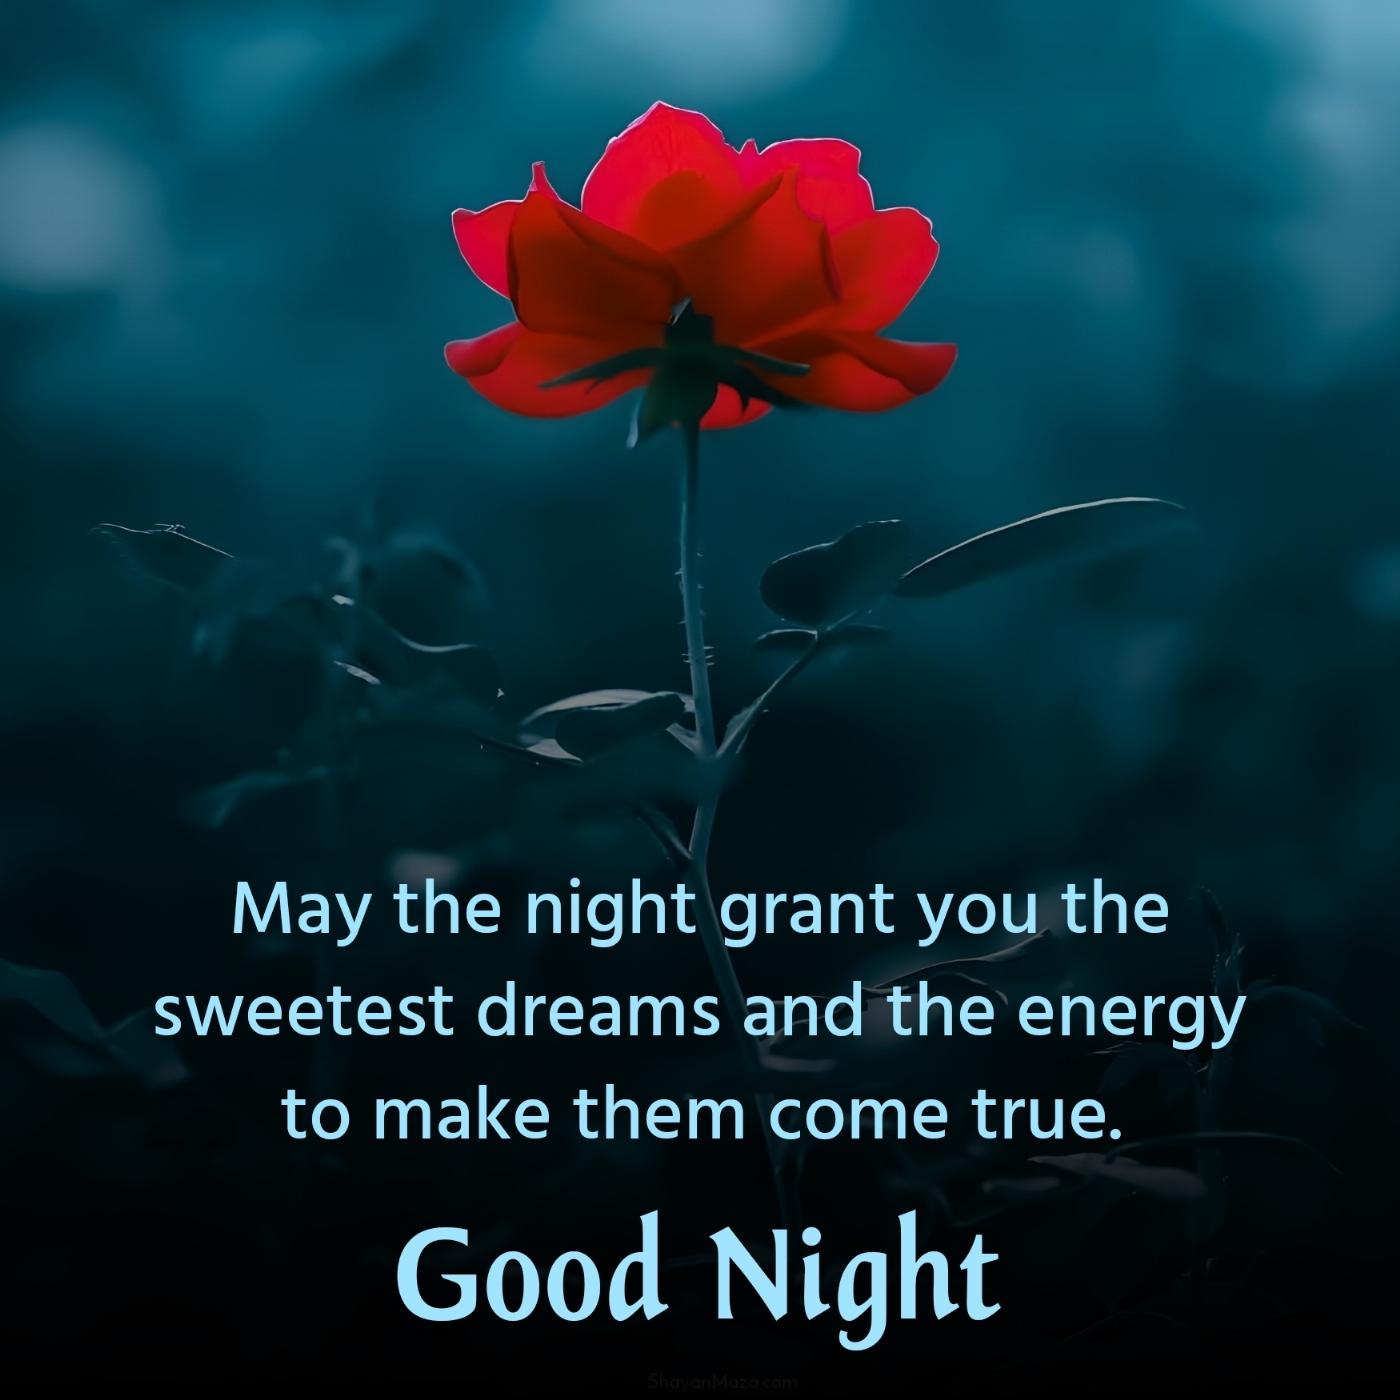 May the night grant you the sweetest dreams and the energy